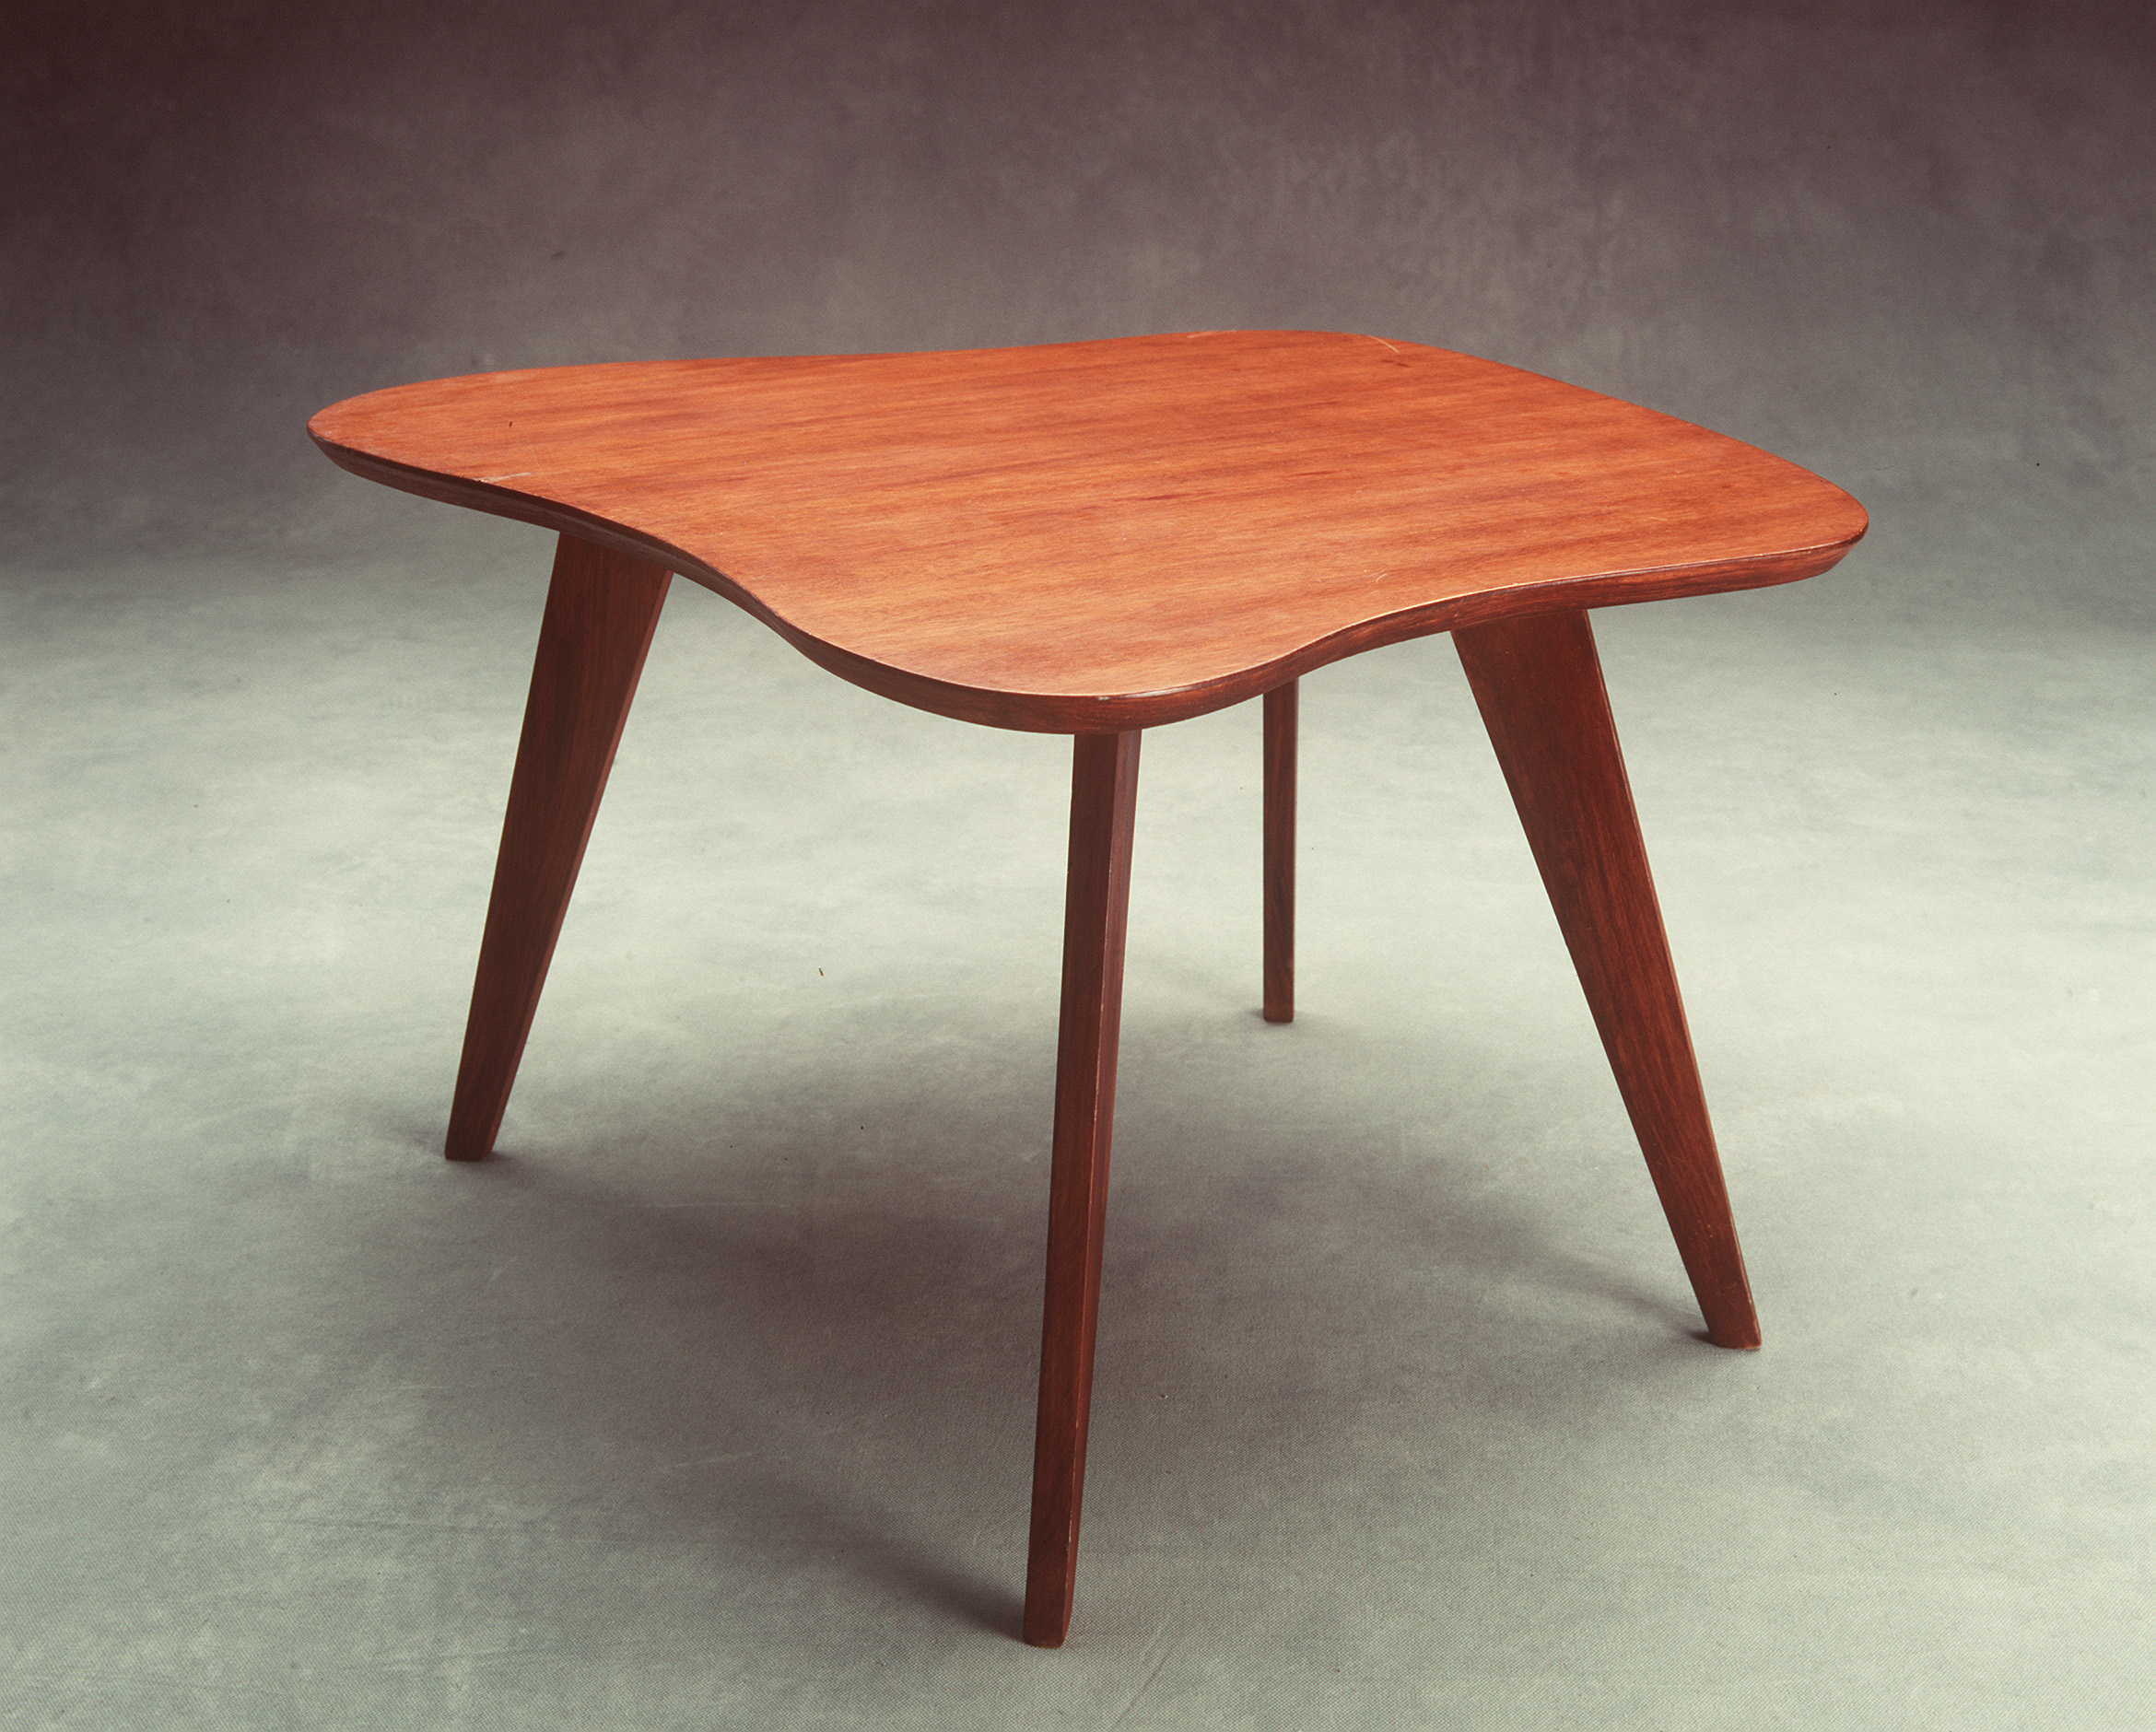 Coffe table designed by Douglas Snelling